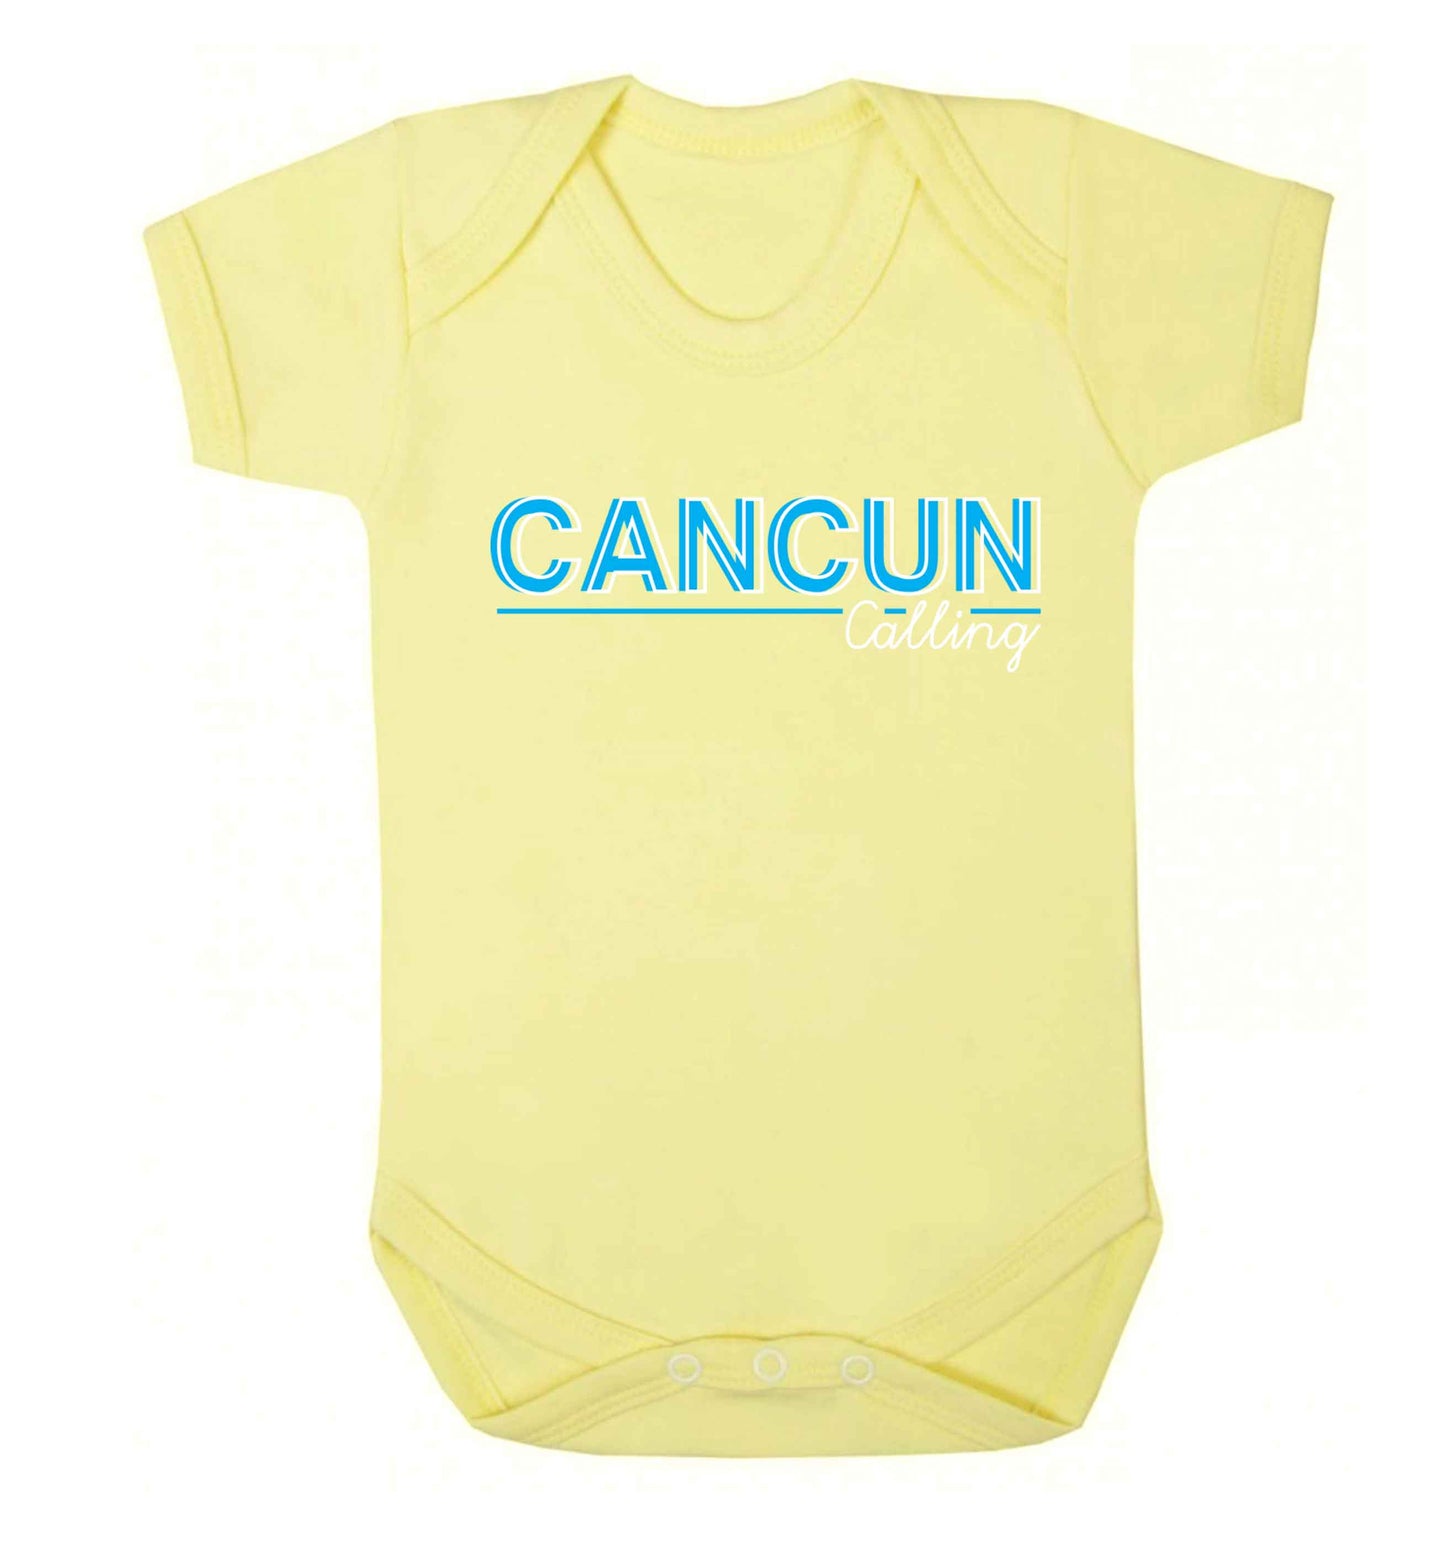 Cancun calling Baby Vest pale yellow 18-24 months